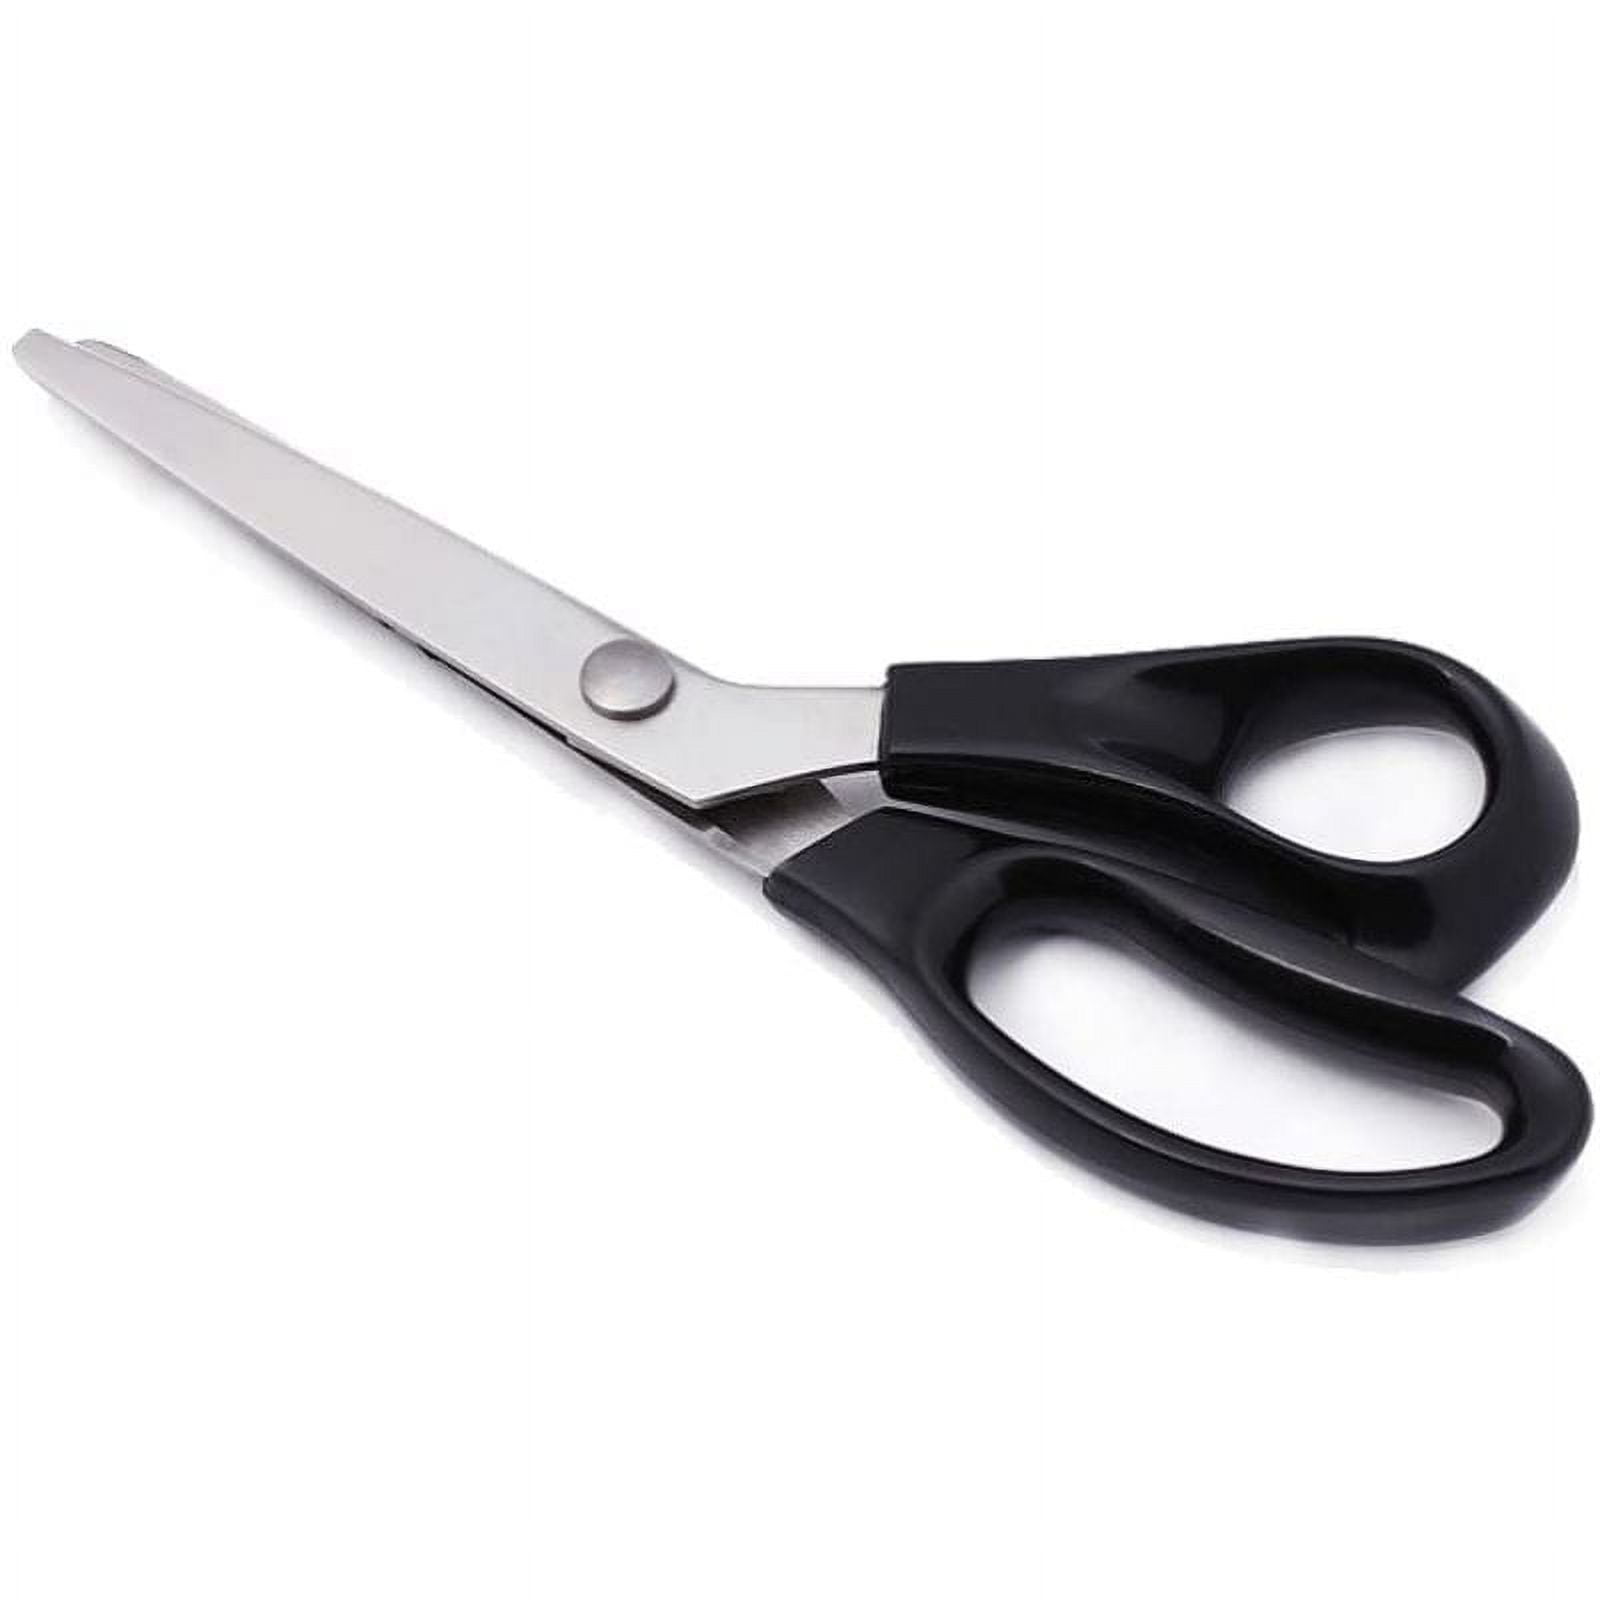 Large Tailor Scissors For Sewing With Orange Handles And Scissors With  Zigzag Blades With Black Handles Stock Illustration - Download Image Now -  iStock